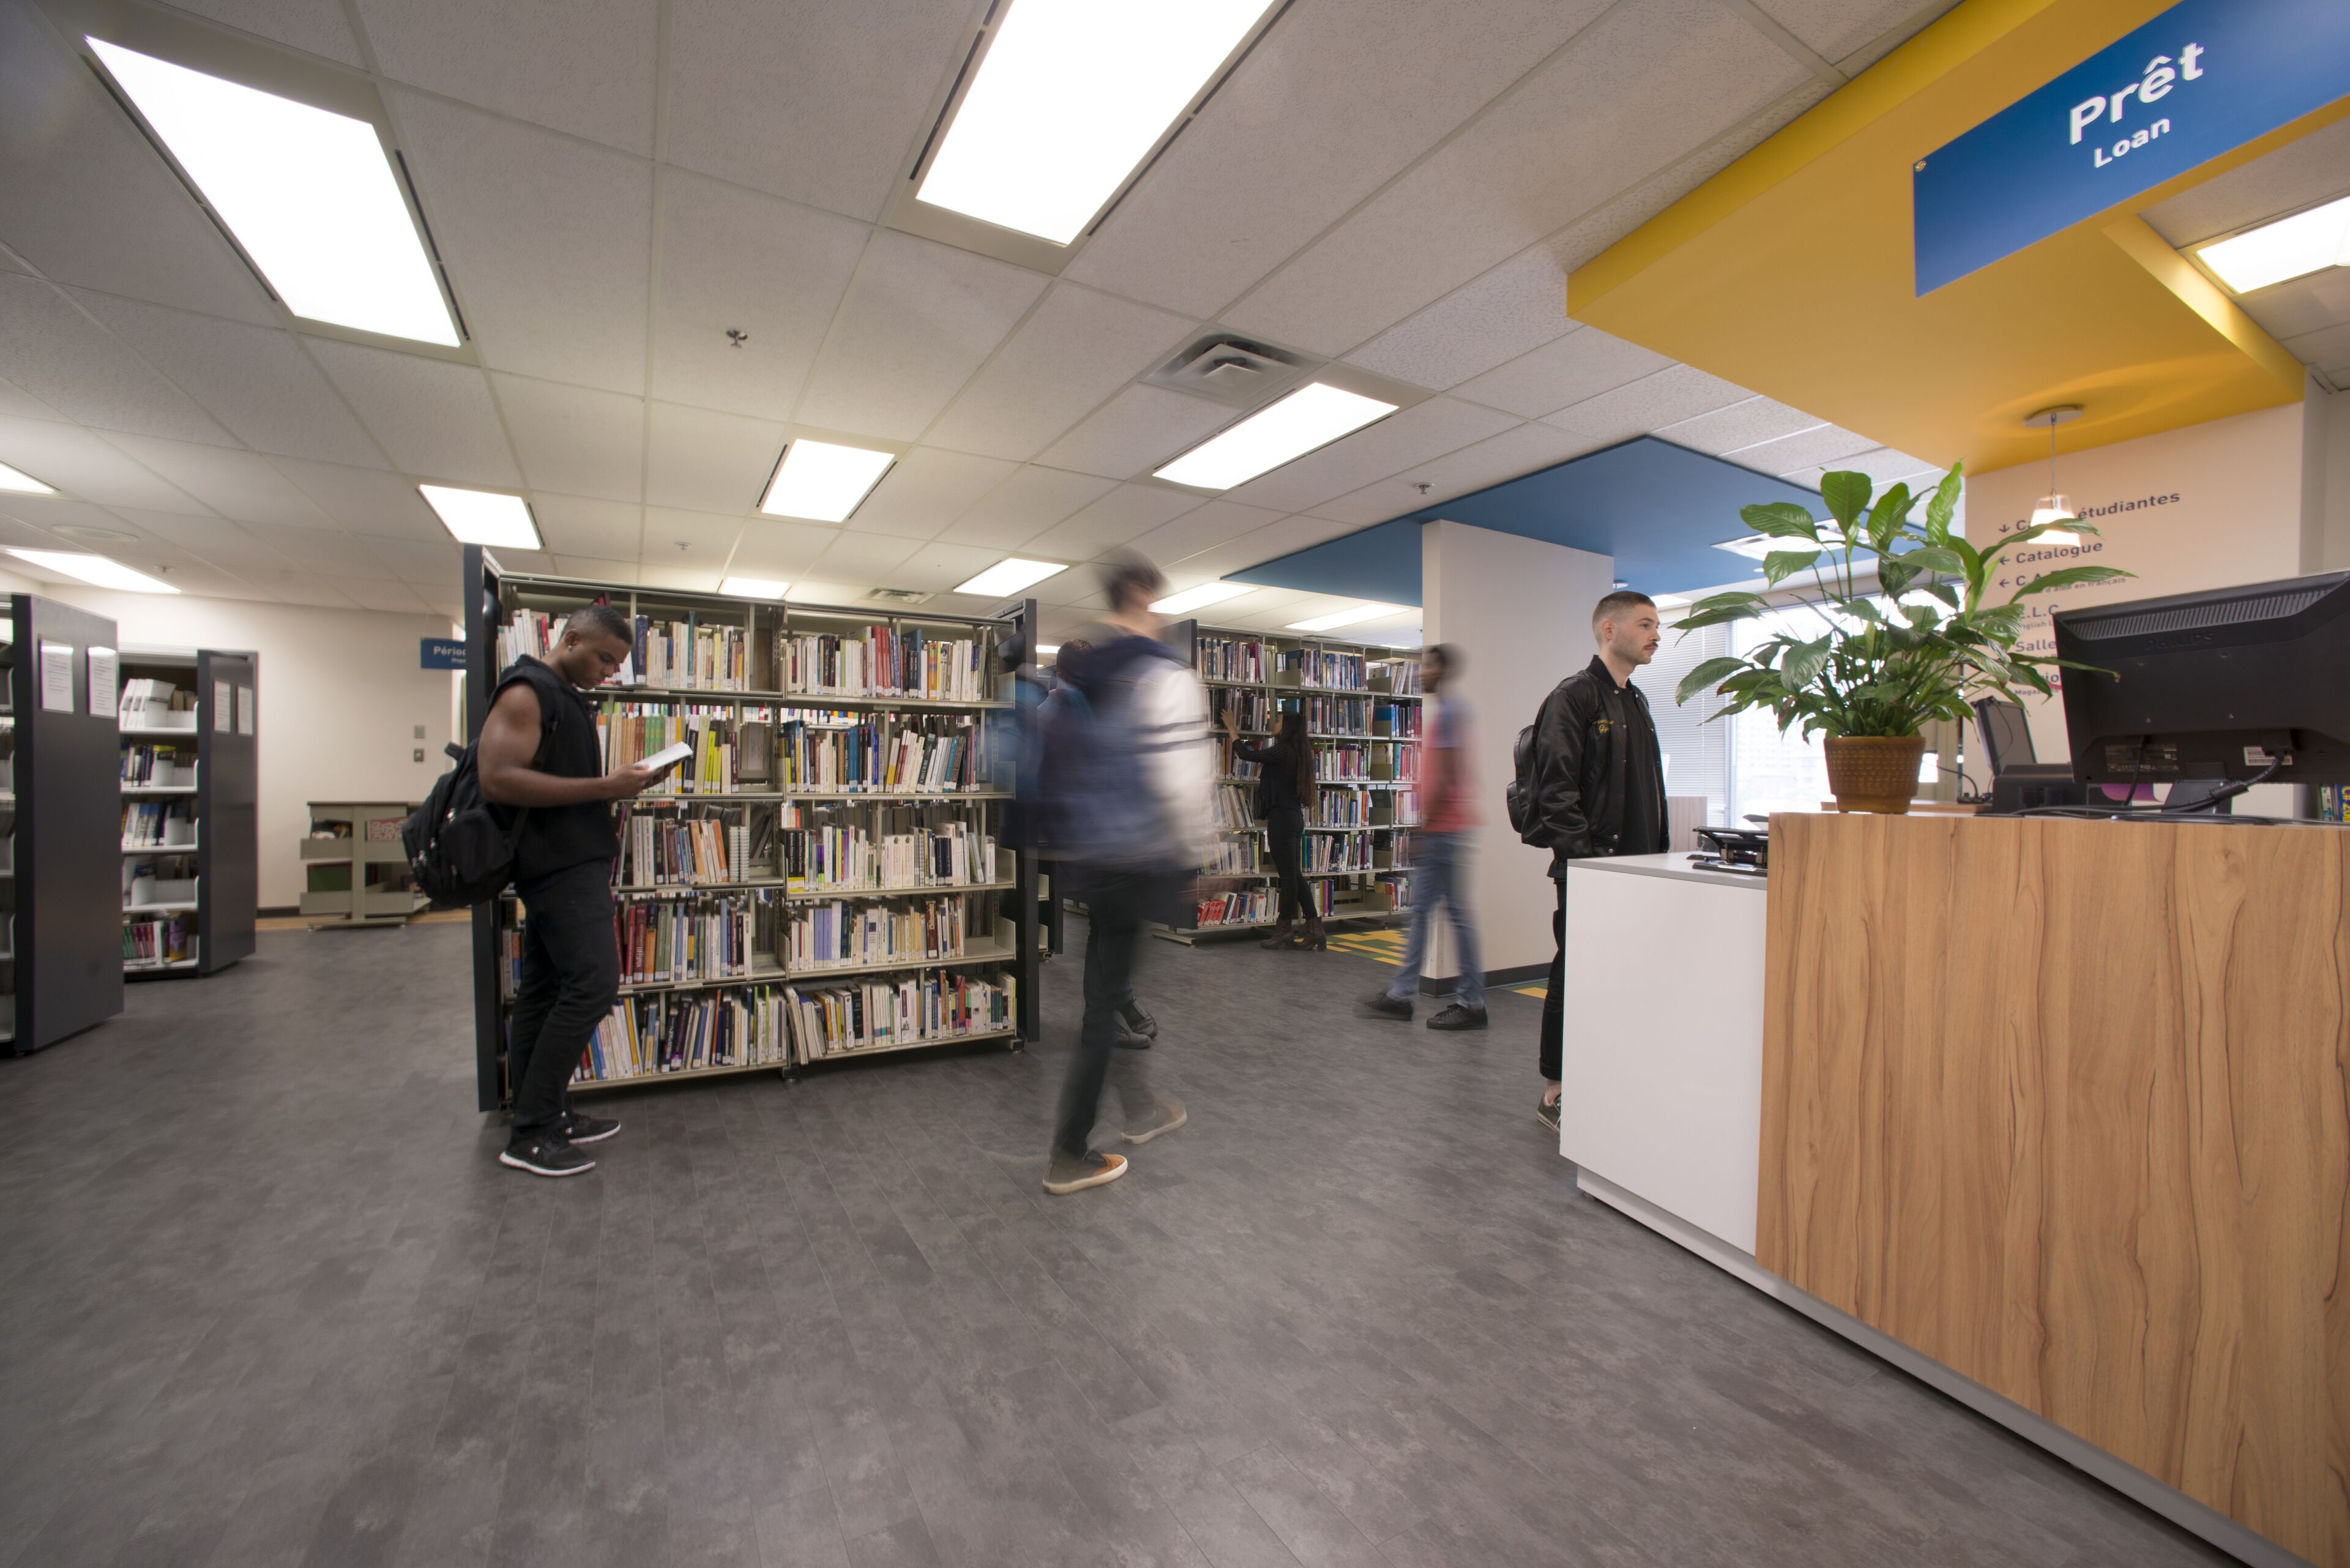 Students engage with books in a bustling college library, fostering a community of learning.